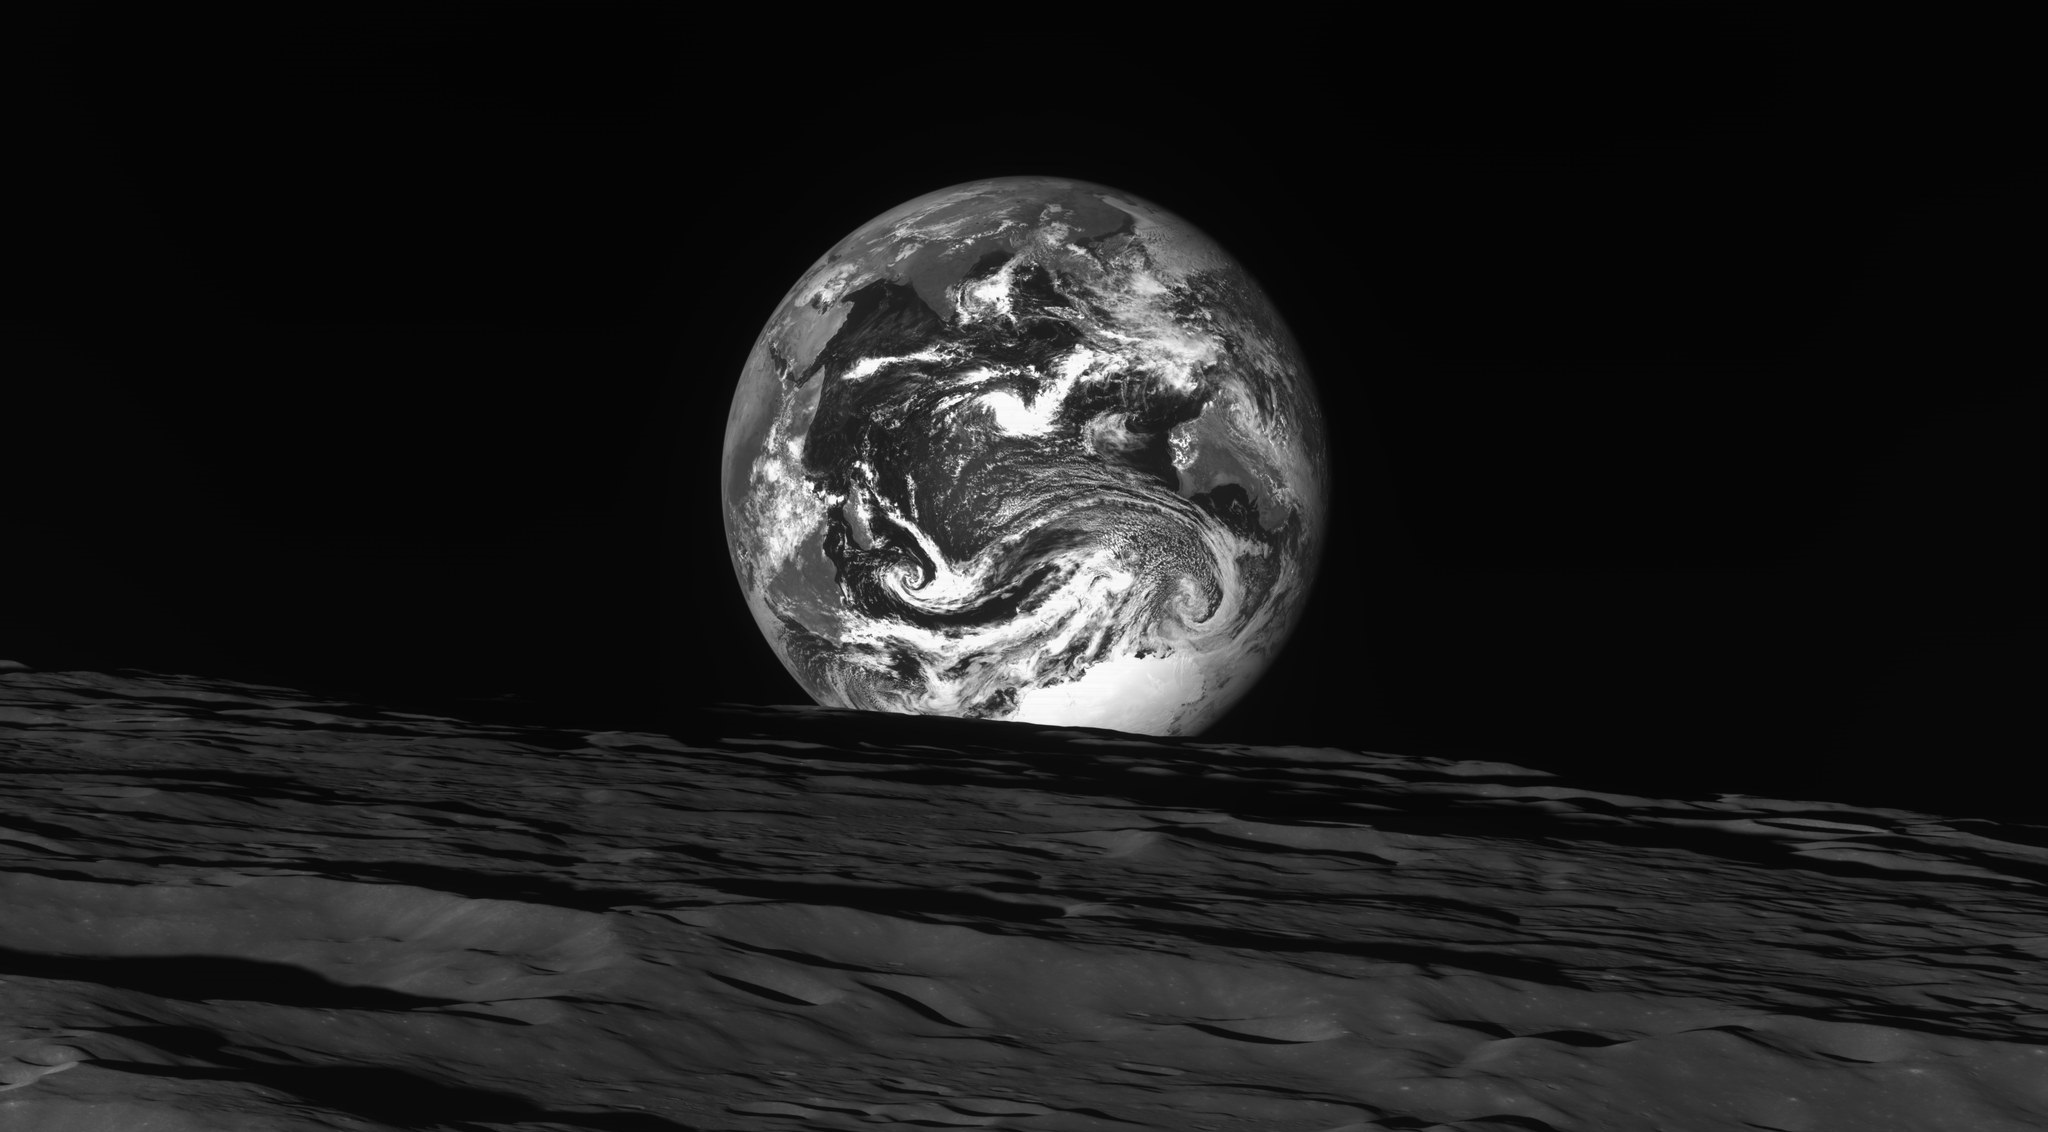 A black and white photograph of the Earth rising behind the Moon. Image Credit: Danuri/ South Korean Space Agency.